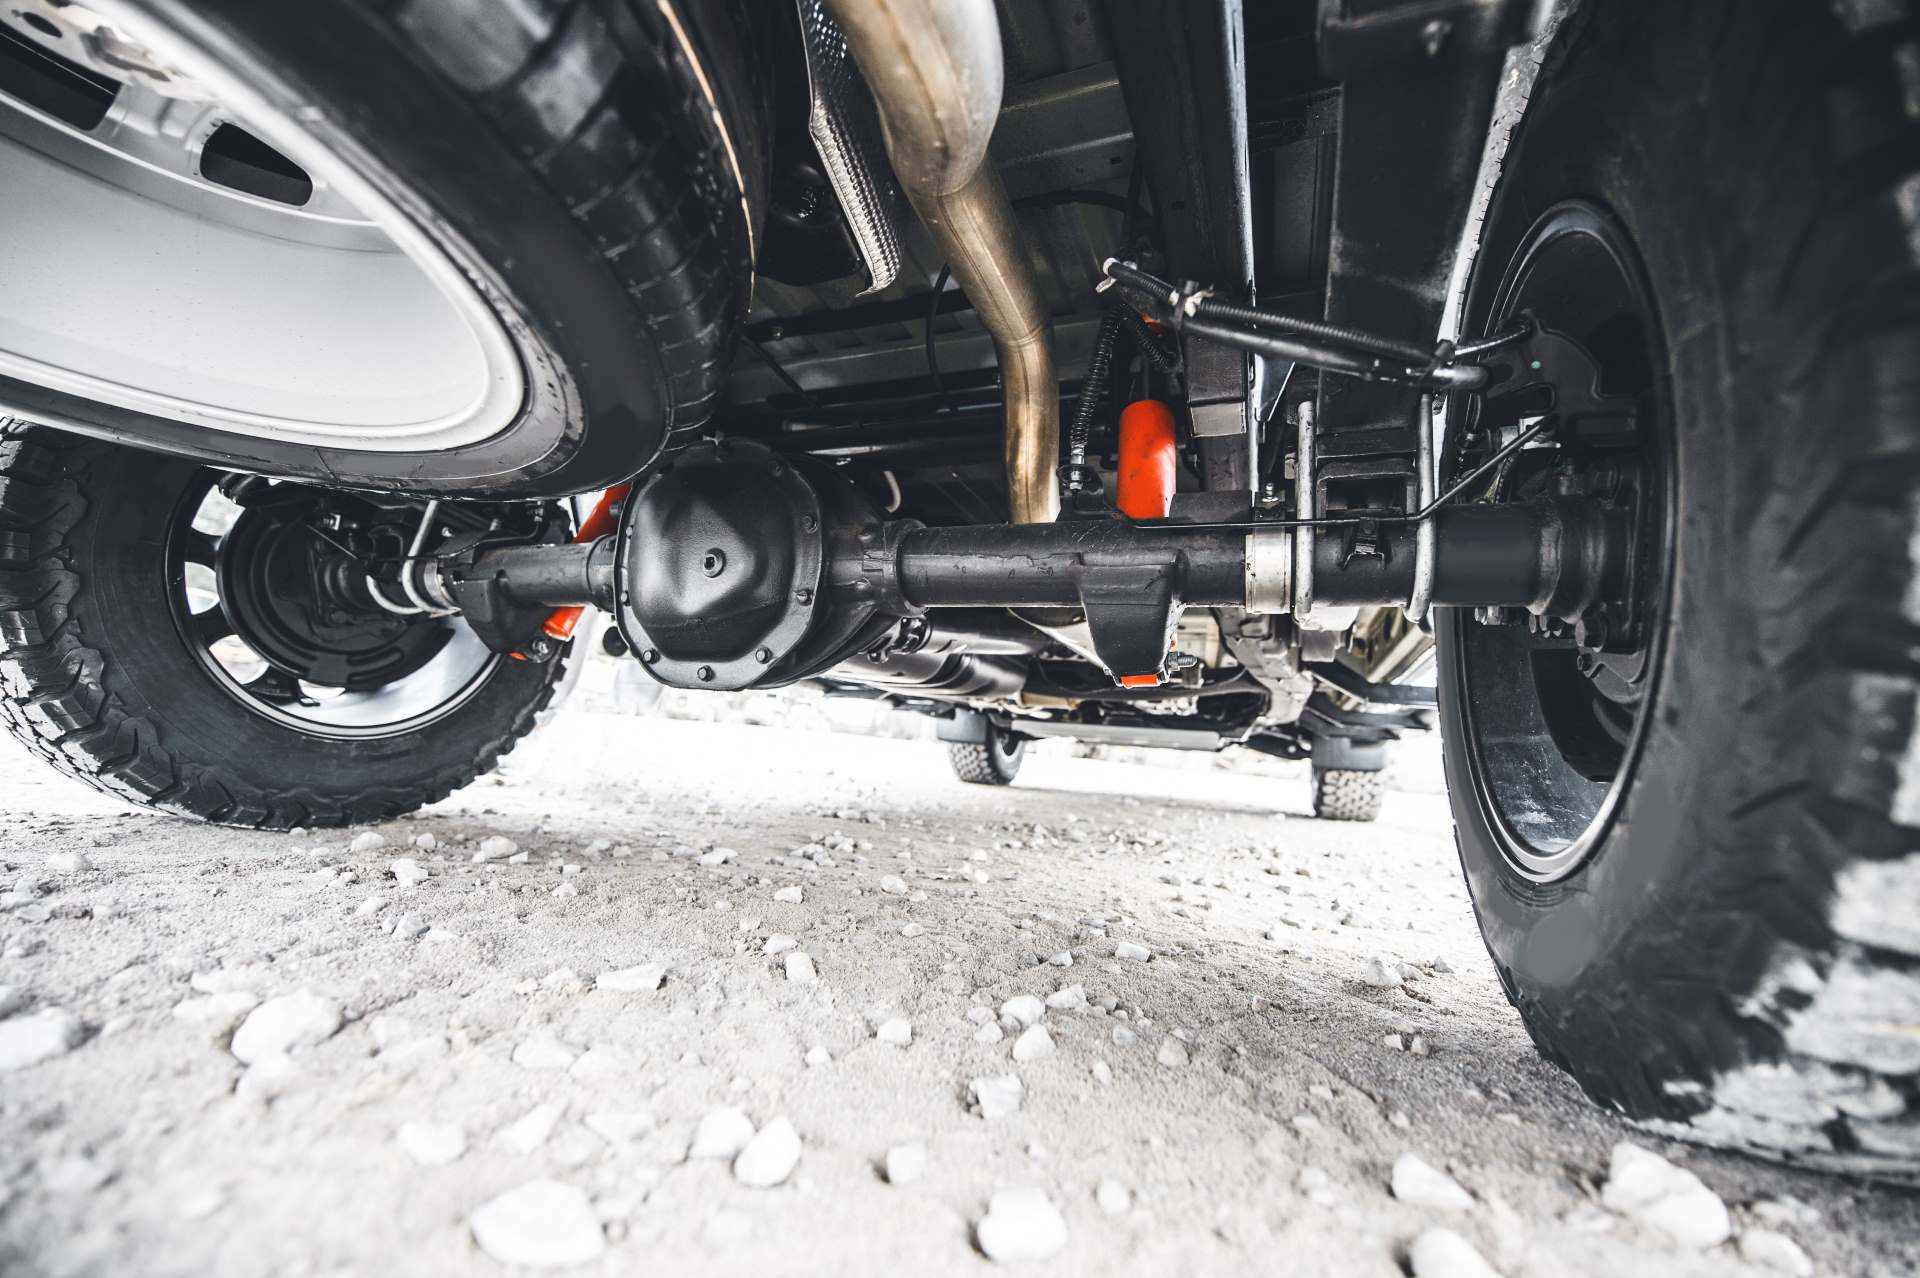 POV of a truck owner under a truck inspecting the axle, suspension and exhaust systems under the chassis